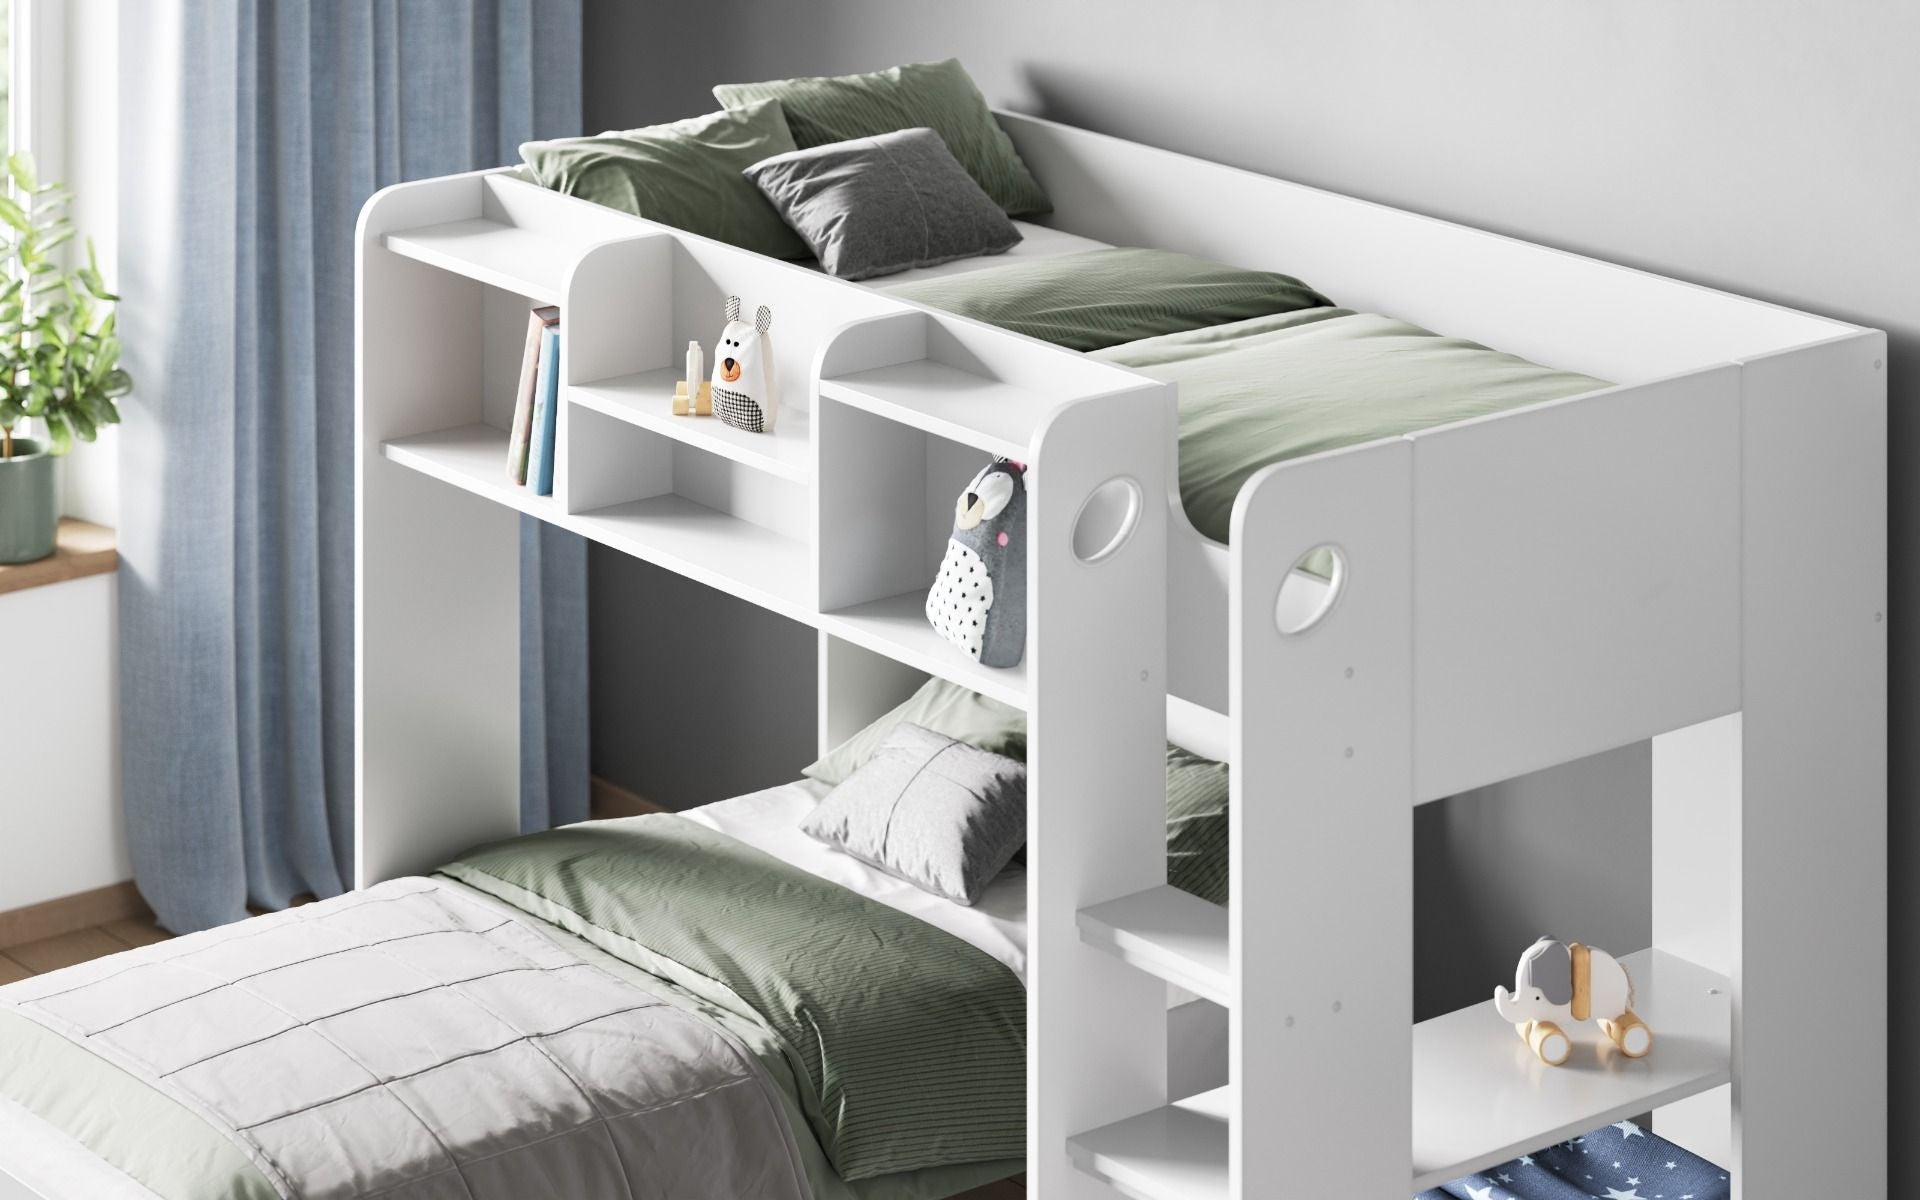 Flair Wizard Junior L Shaped Bunk Bed - White